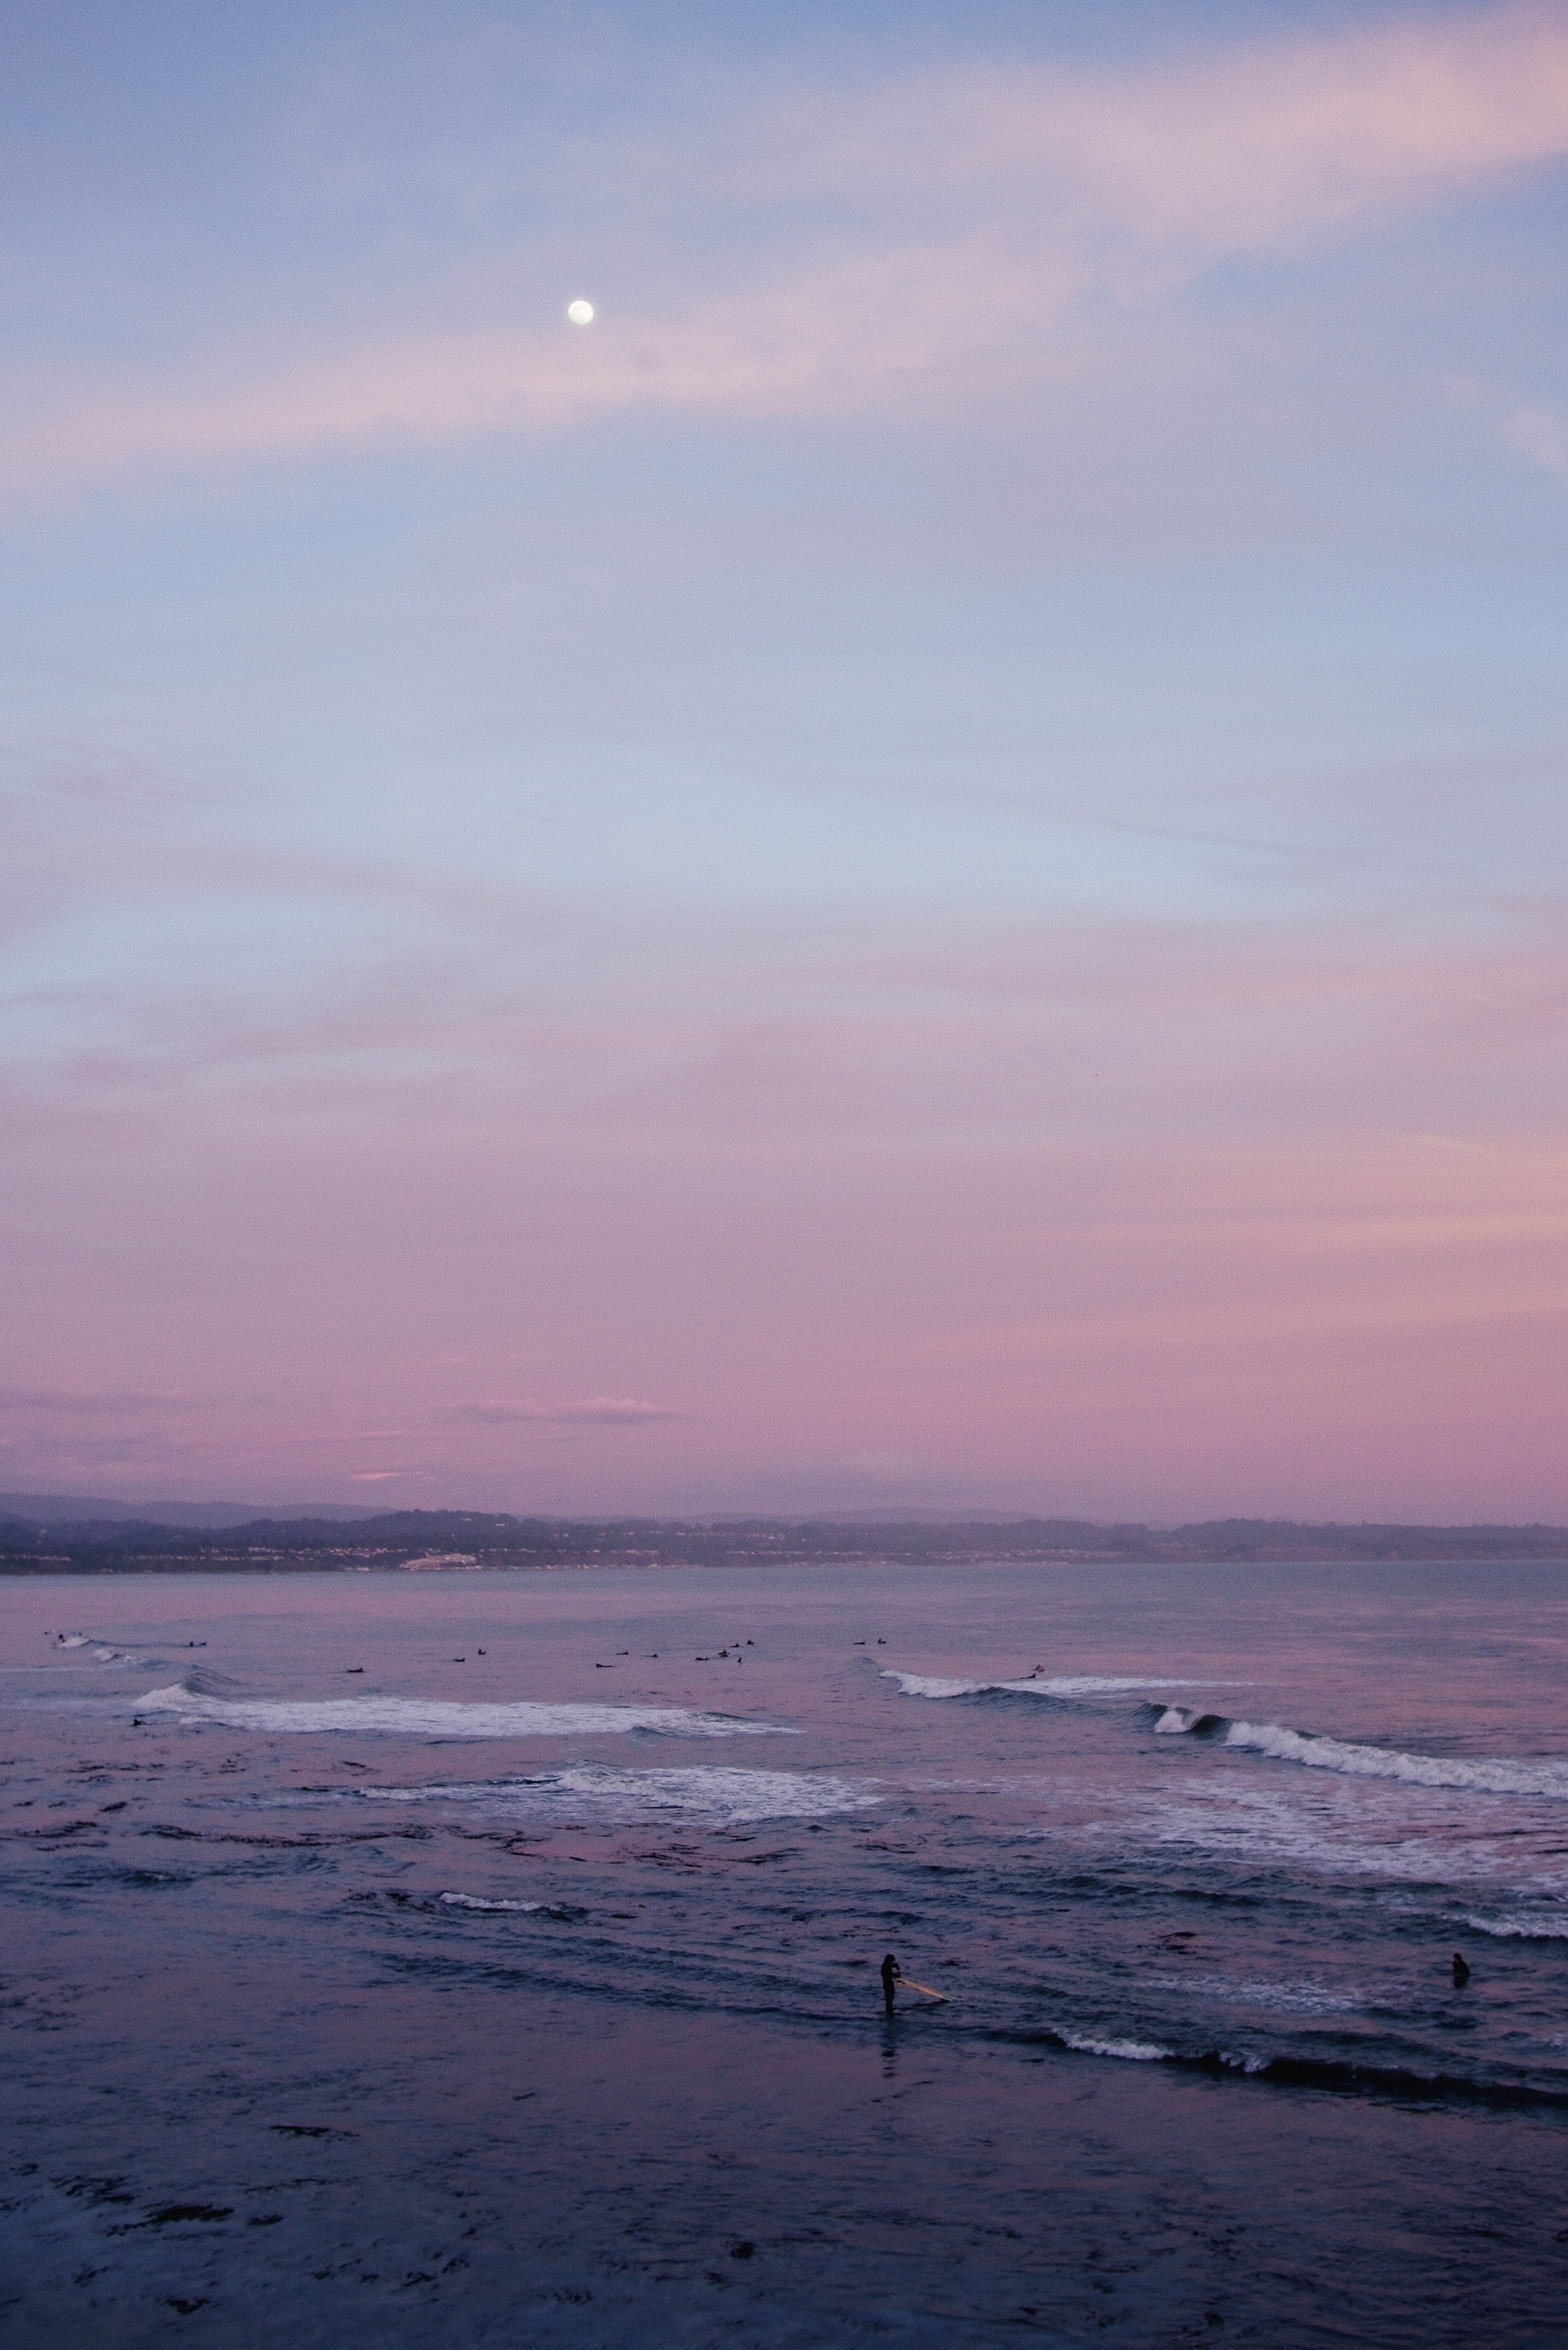 Sunset. A surfer pulls his board out of the waves. The sky is pink and so is the sand reflecting it. The moon hangs as a small dot above it all.